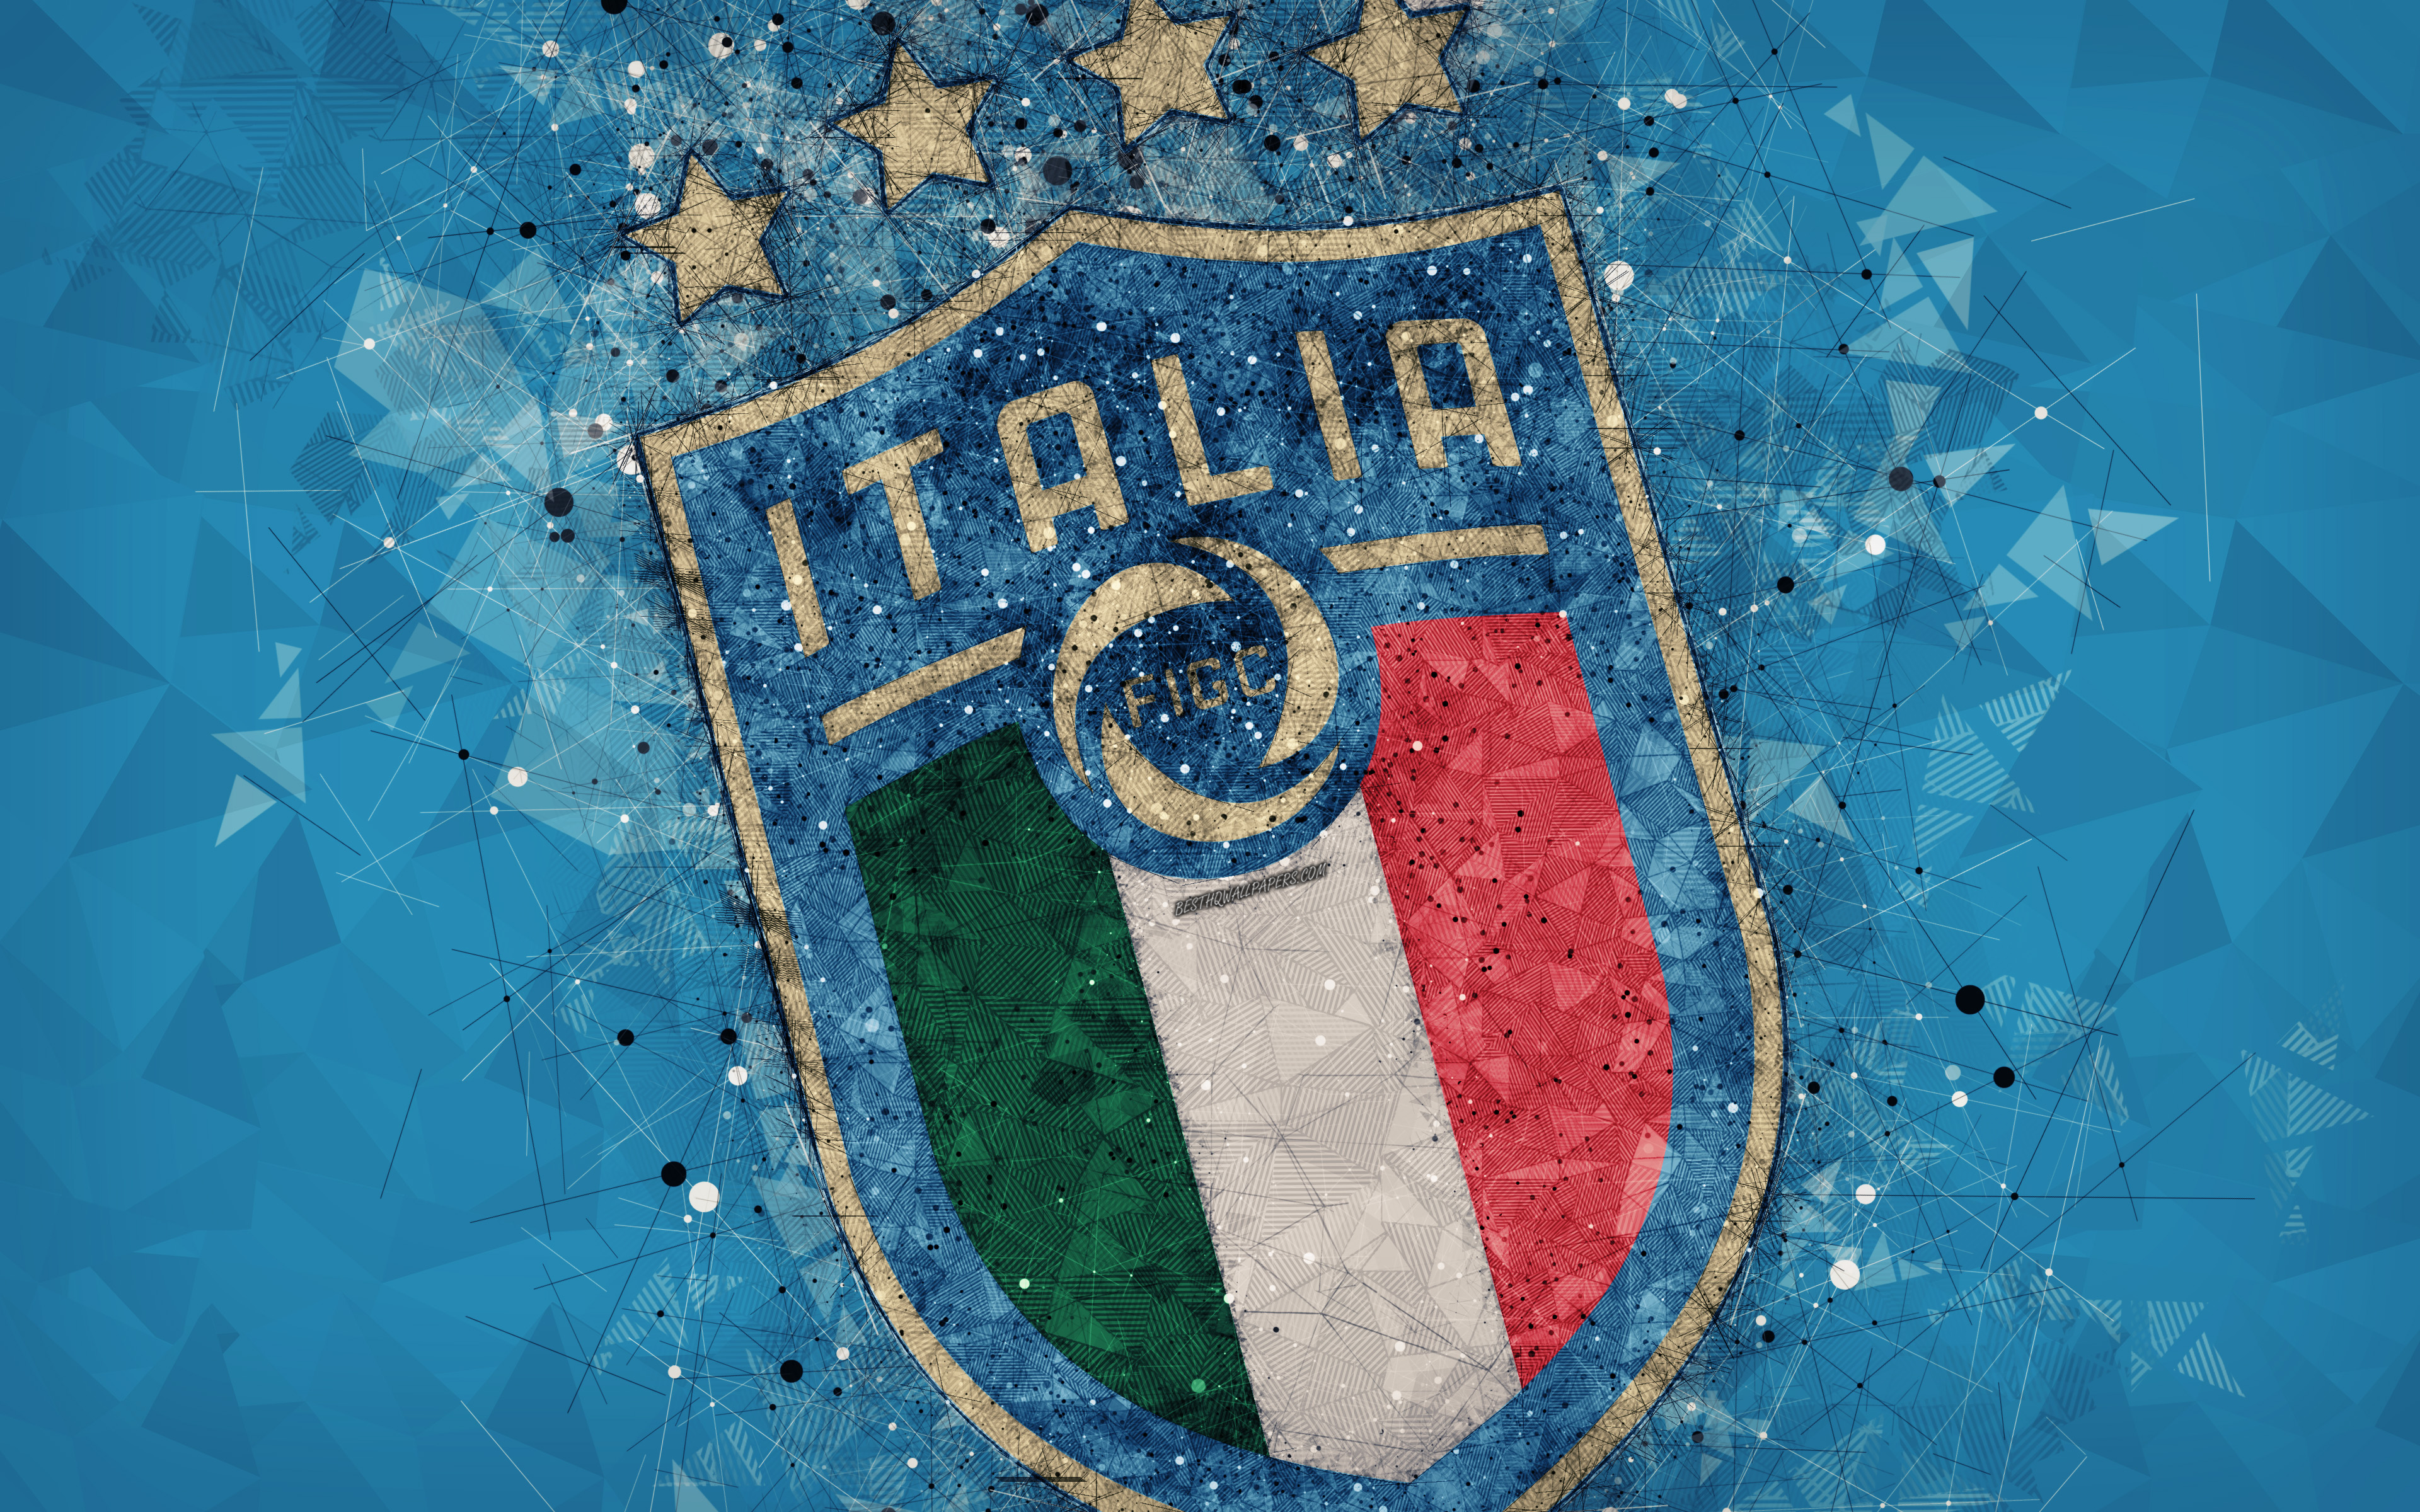 Download wallpaper Italy national football team, new logo, 4k, geometric art, logo, blue abstract background, UEFA, new emblem, Italy, football, grunge style, creative art for desktop with resolution 3840x2400. High Quality HD